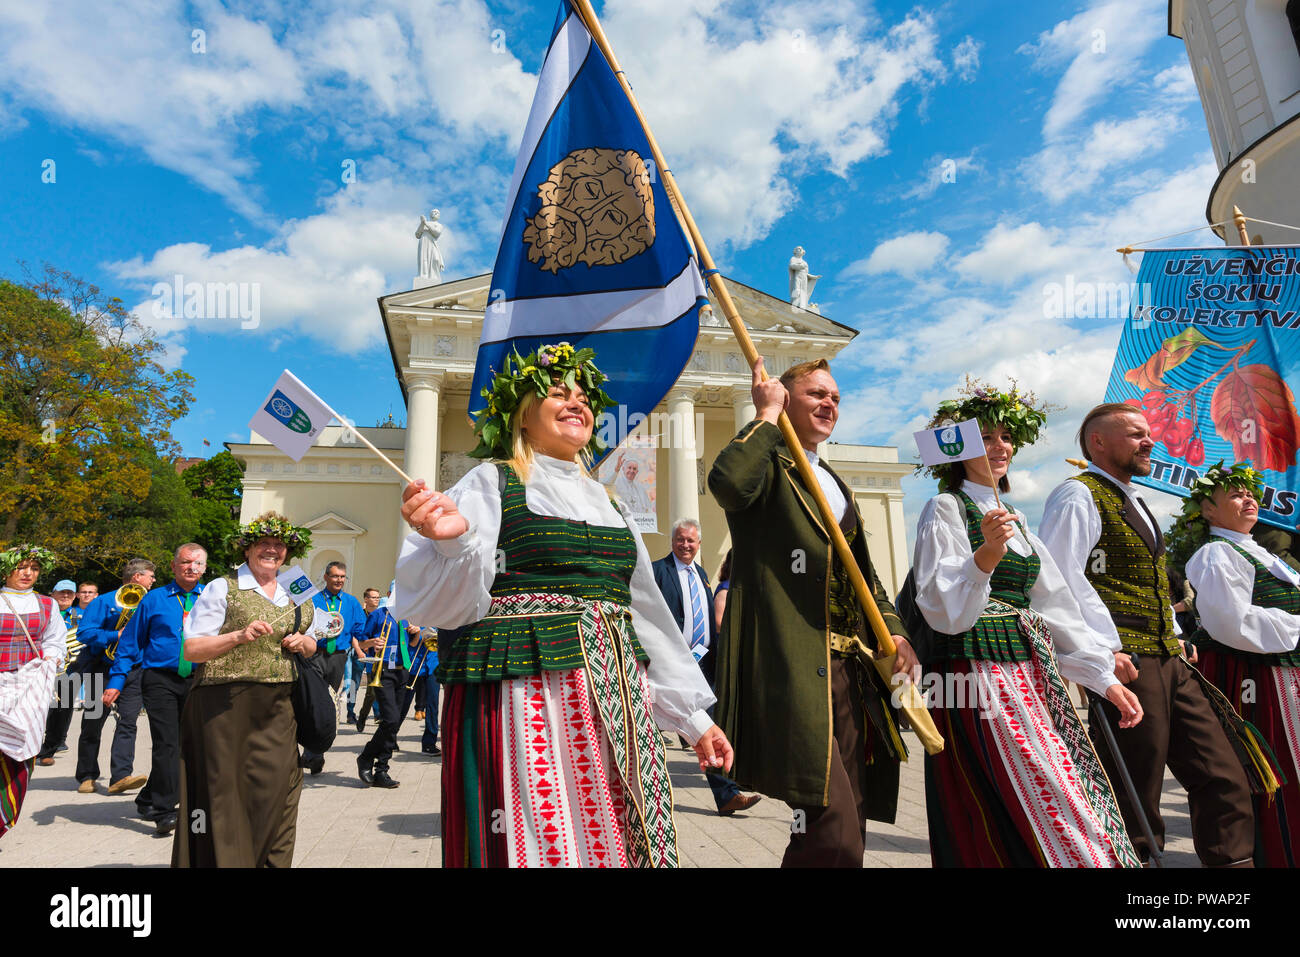 Lithuania people, view of people from the town of Kelme dressed in traditional costume parading in the Lithuania Song and Dance Festival in Vilnius. Stock Photo